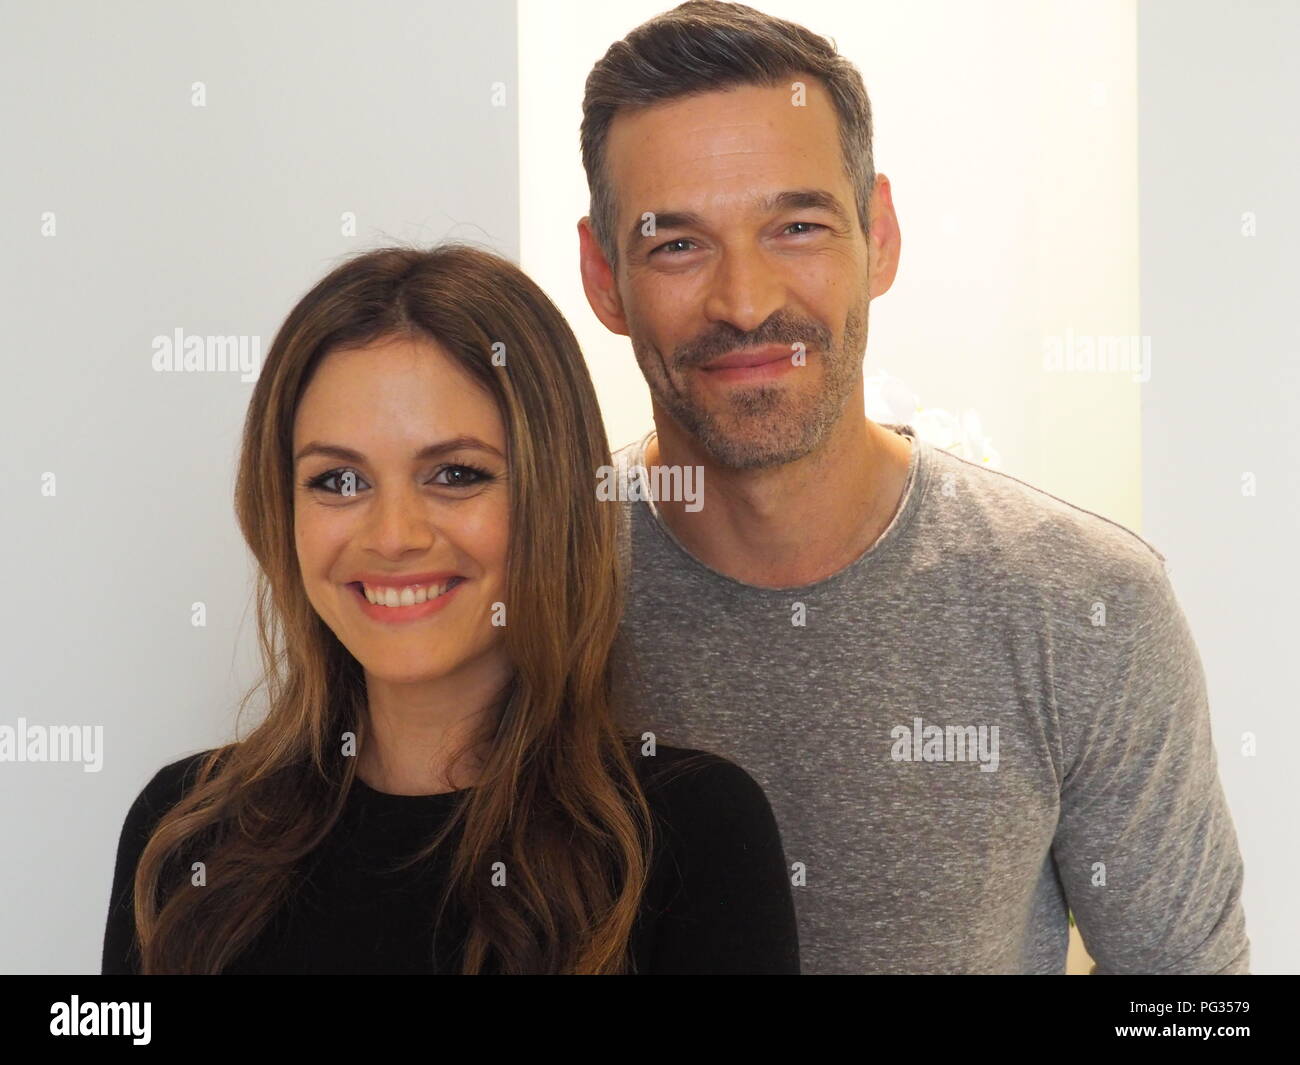 Paris, France. 23rd Aug, 2018. The American actors Rachel Bilson and Eddie Cibrian at a photo shoot for the presentation of the Vox series "Take Two". (on dpa "US actress Rachel Bilson would like to come to Germany" from 23.08.2018) Credit: Christian Böhmer/dpa/Alamy Live News Stock Photo